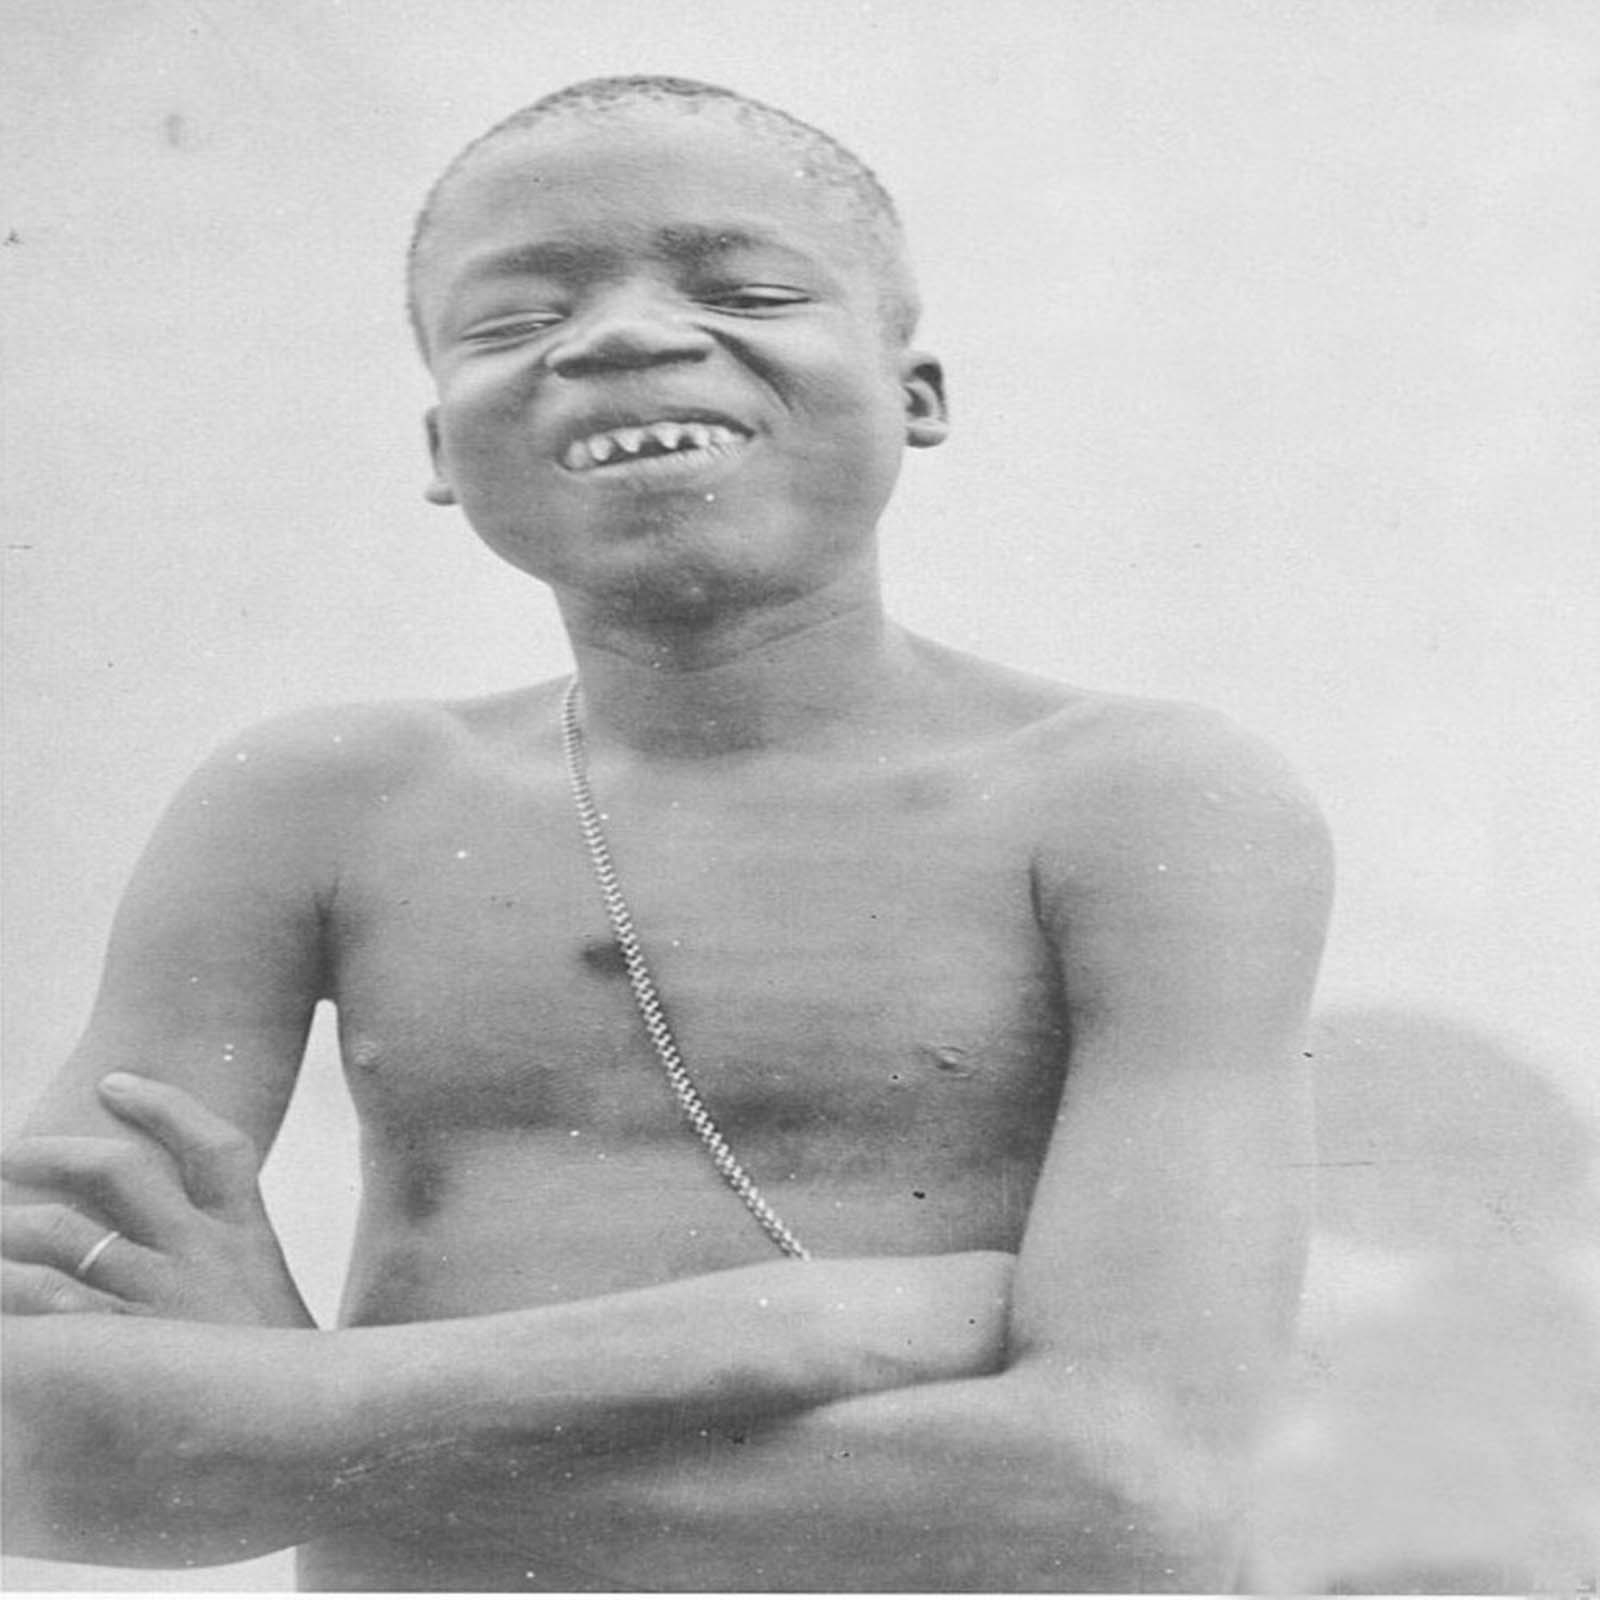 Ota Benga, a Congolese man exhibited in the New York's Bronx Zoo in 1906, was shockingly described as a 'missing link' of evolution. Over 40,000 people came to see him every day and was often subject to mocking from the crowd.